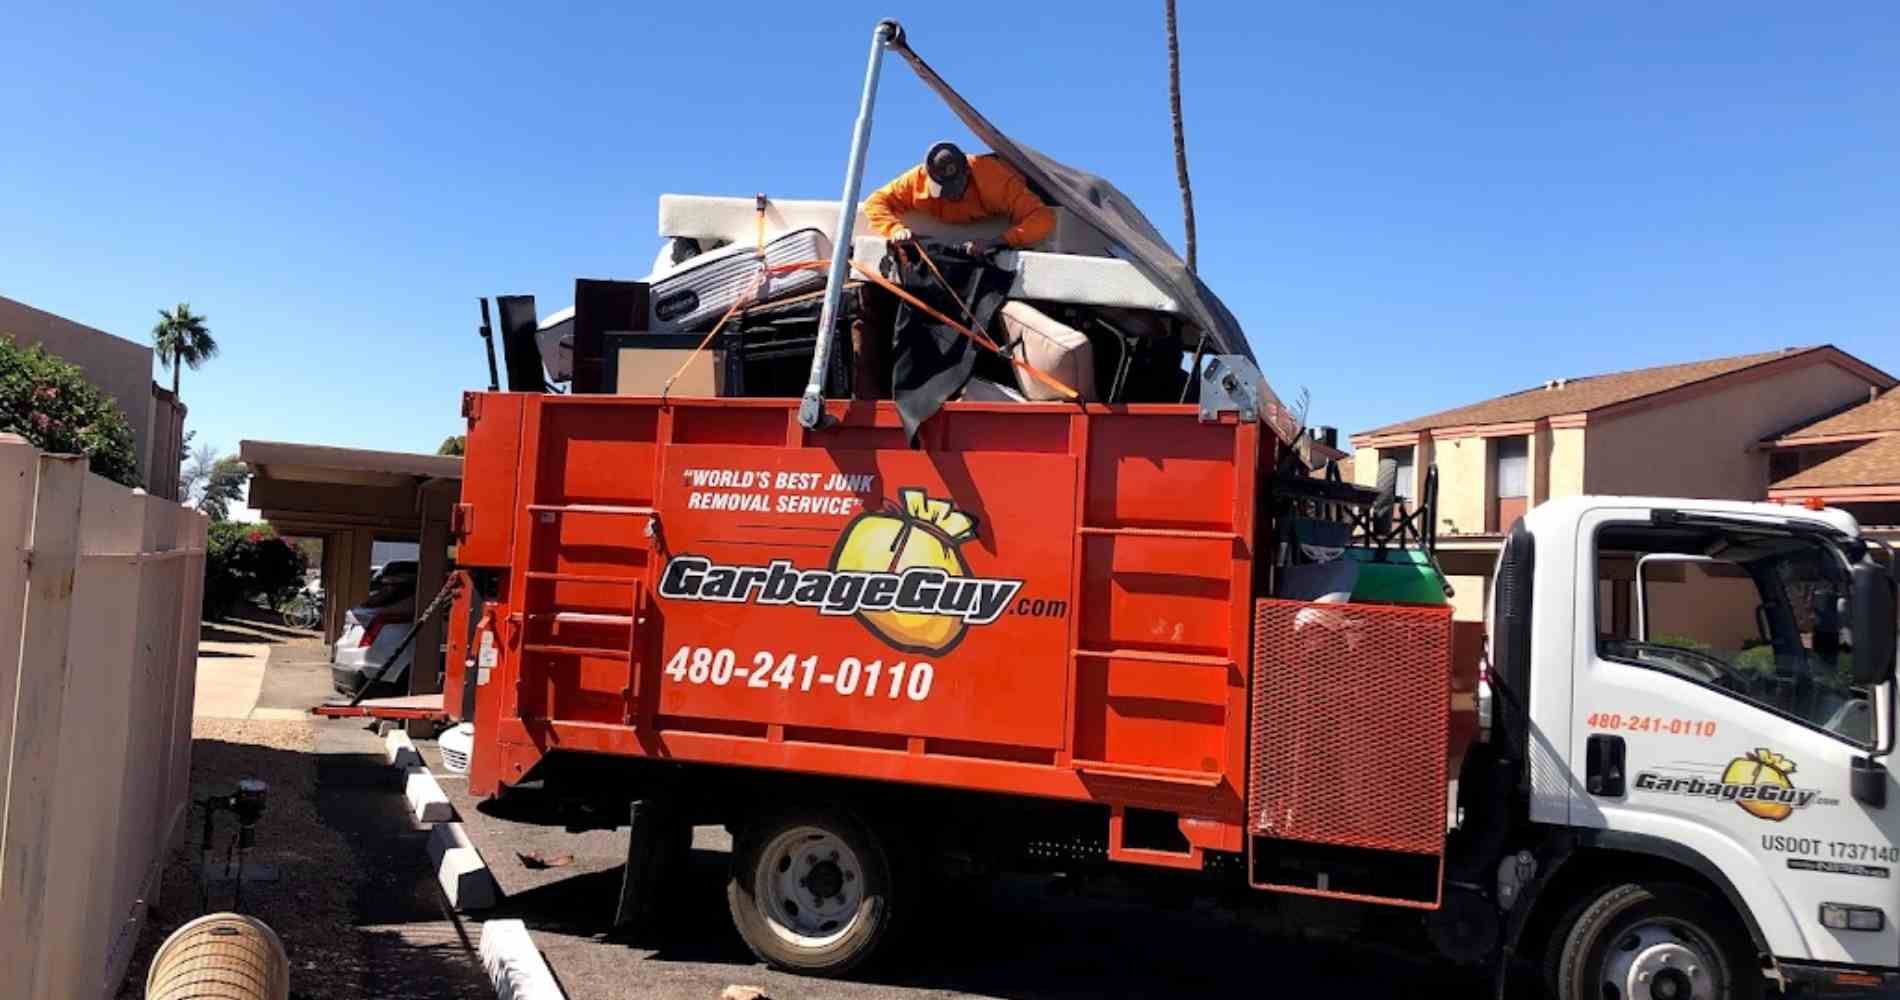 #1 for Furniture Removal in Fountain Hills, AZ With Over 1200 5-Star Reviews!